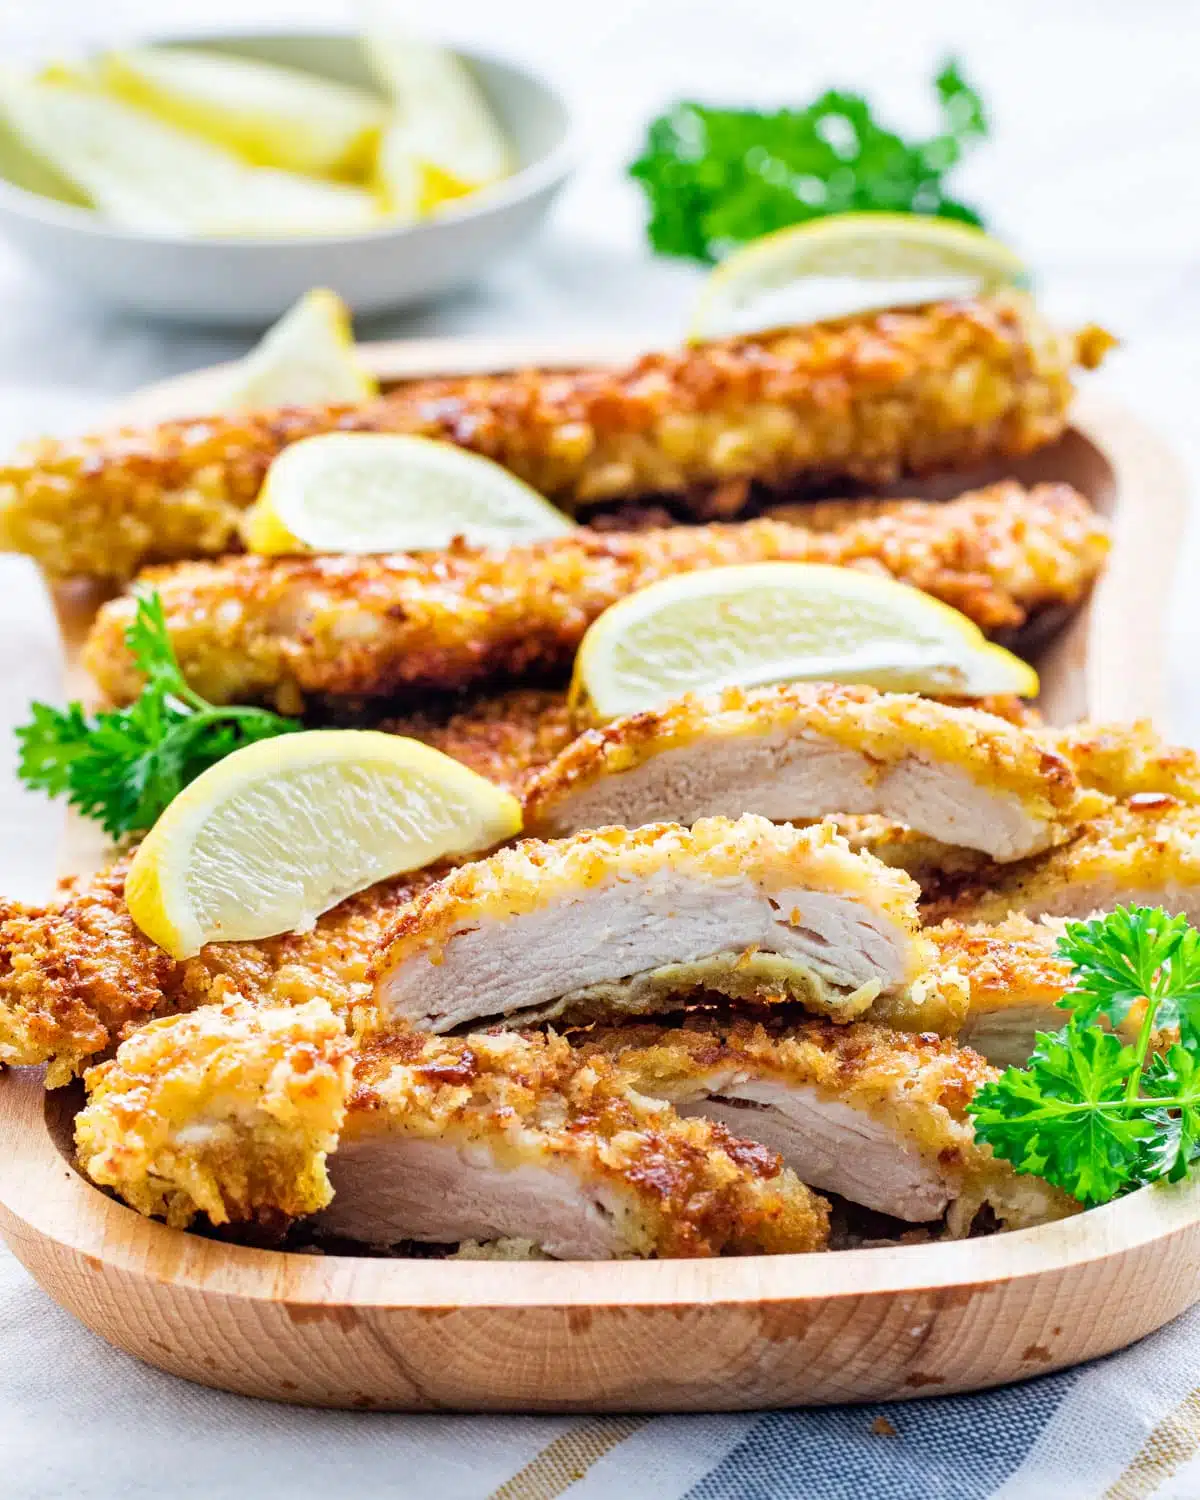 crispy chicken cutlets cut into pieces on a wooden plate garnished with lemon wedges and parsley